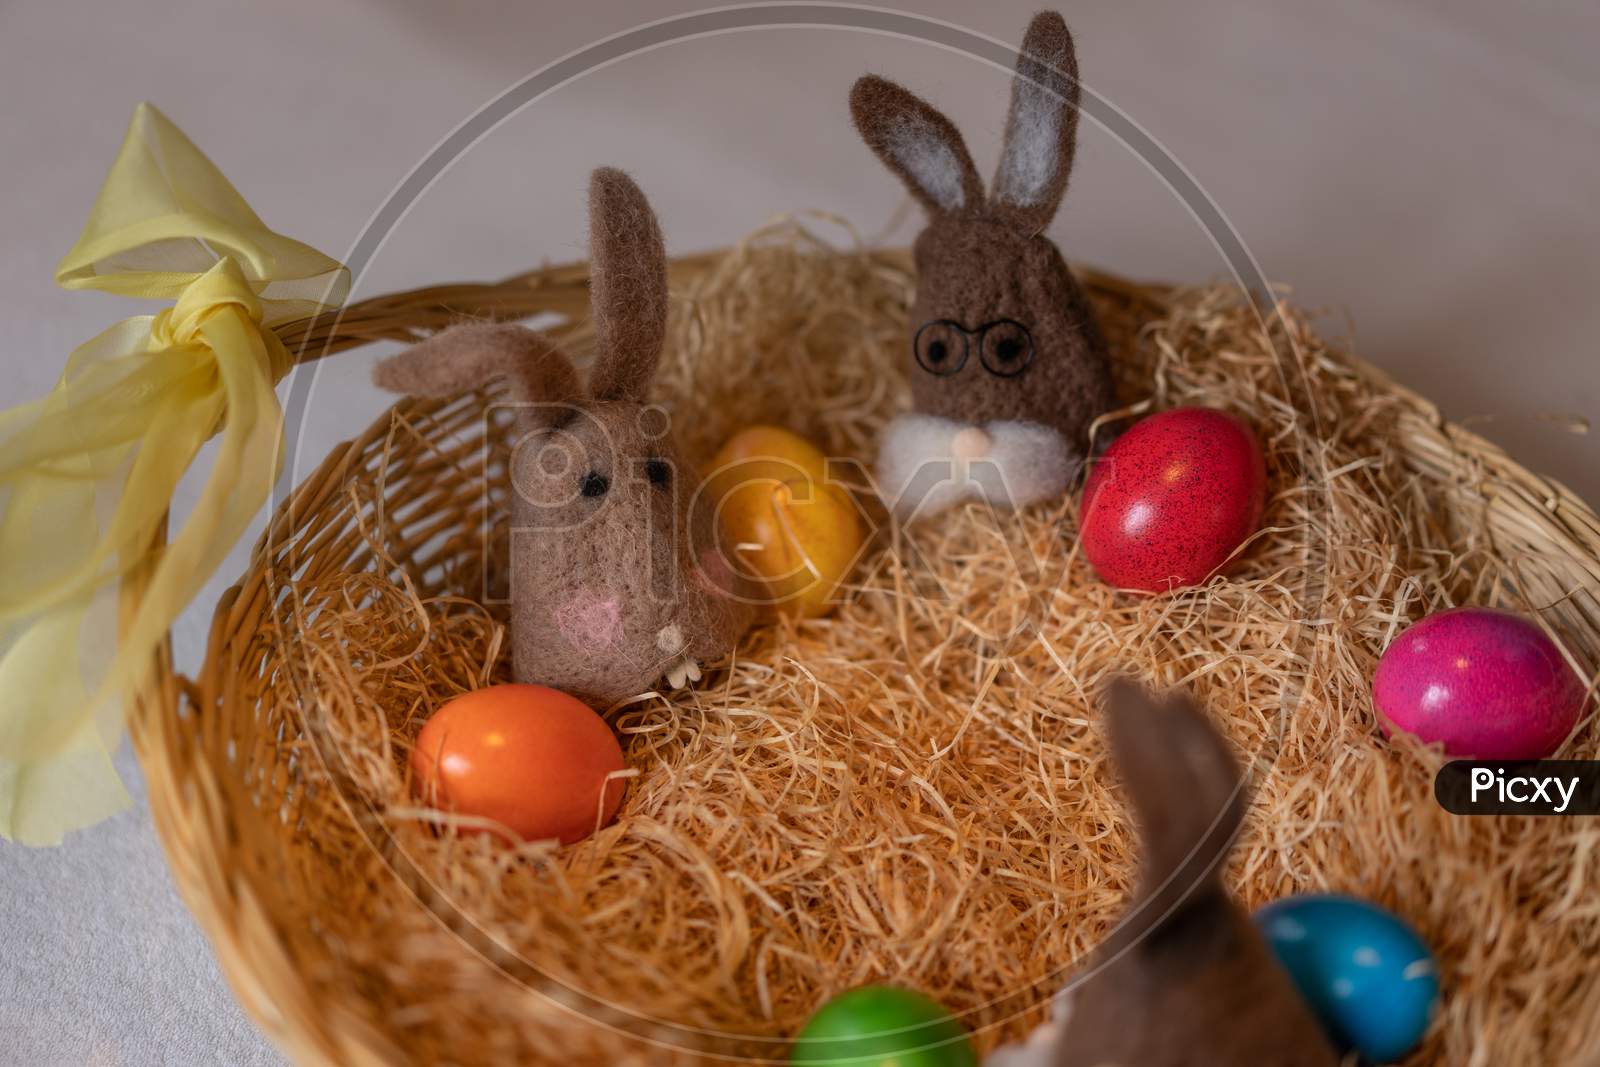 Brown Felt Bunnies With Multicolored Easter Eggs In Nest Of Straw With Colorful Sweet Sugar Eggs.